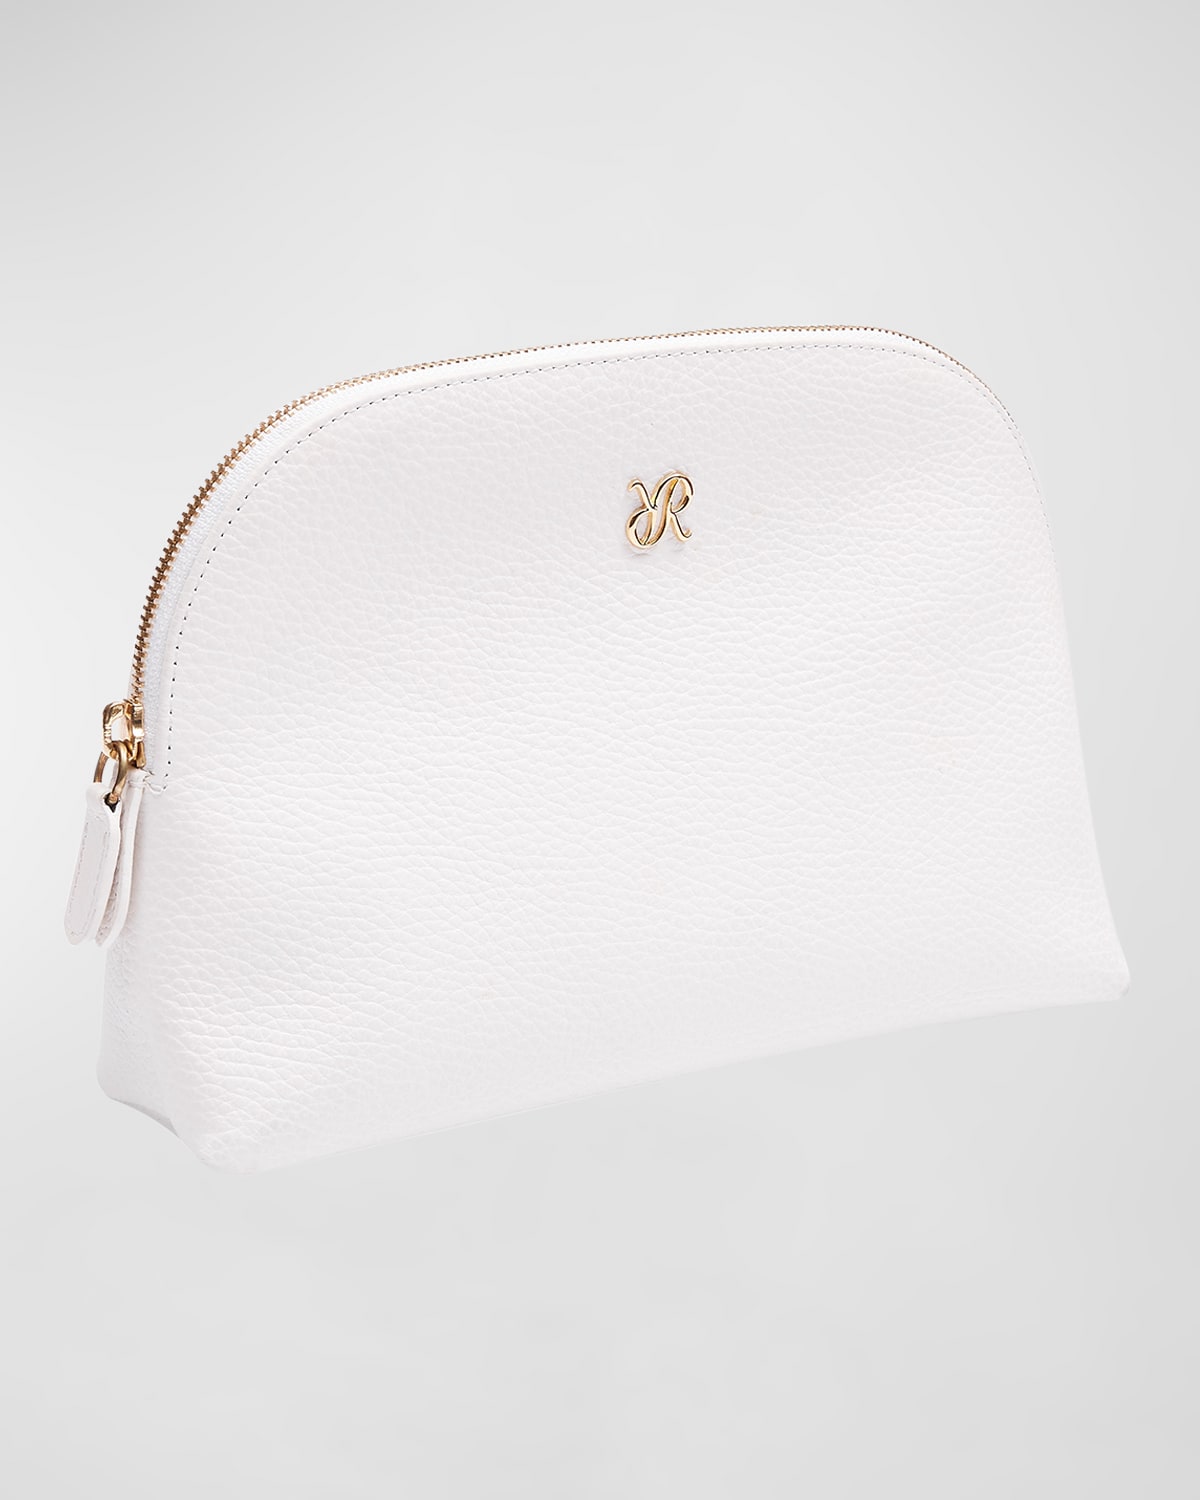 Rapport Tuxedo Collection Makeup Bag In White